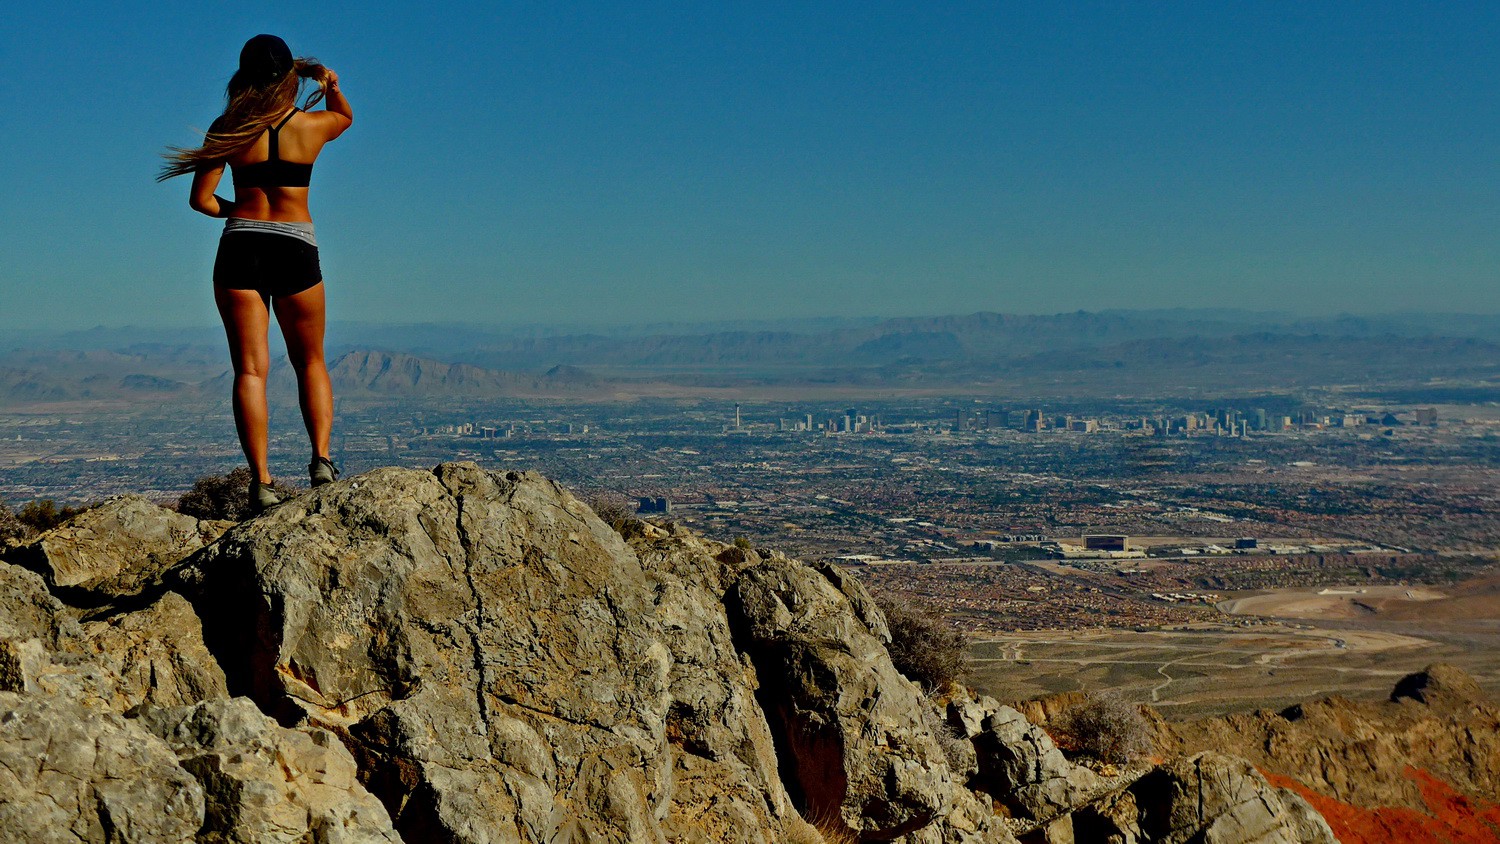 On top of 1922 meters high Turtlehead Mountain with Las Vegas in the background